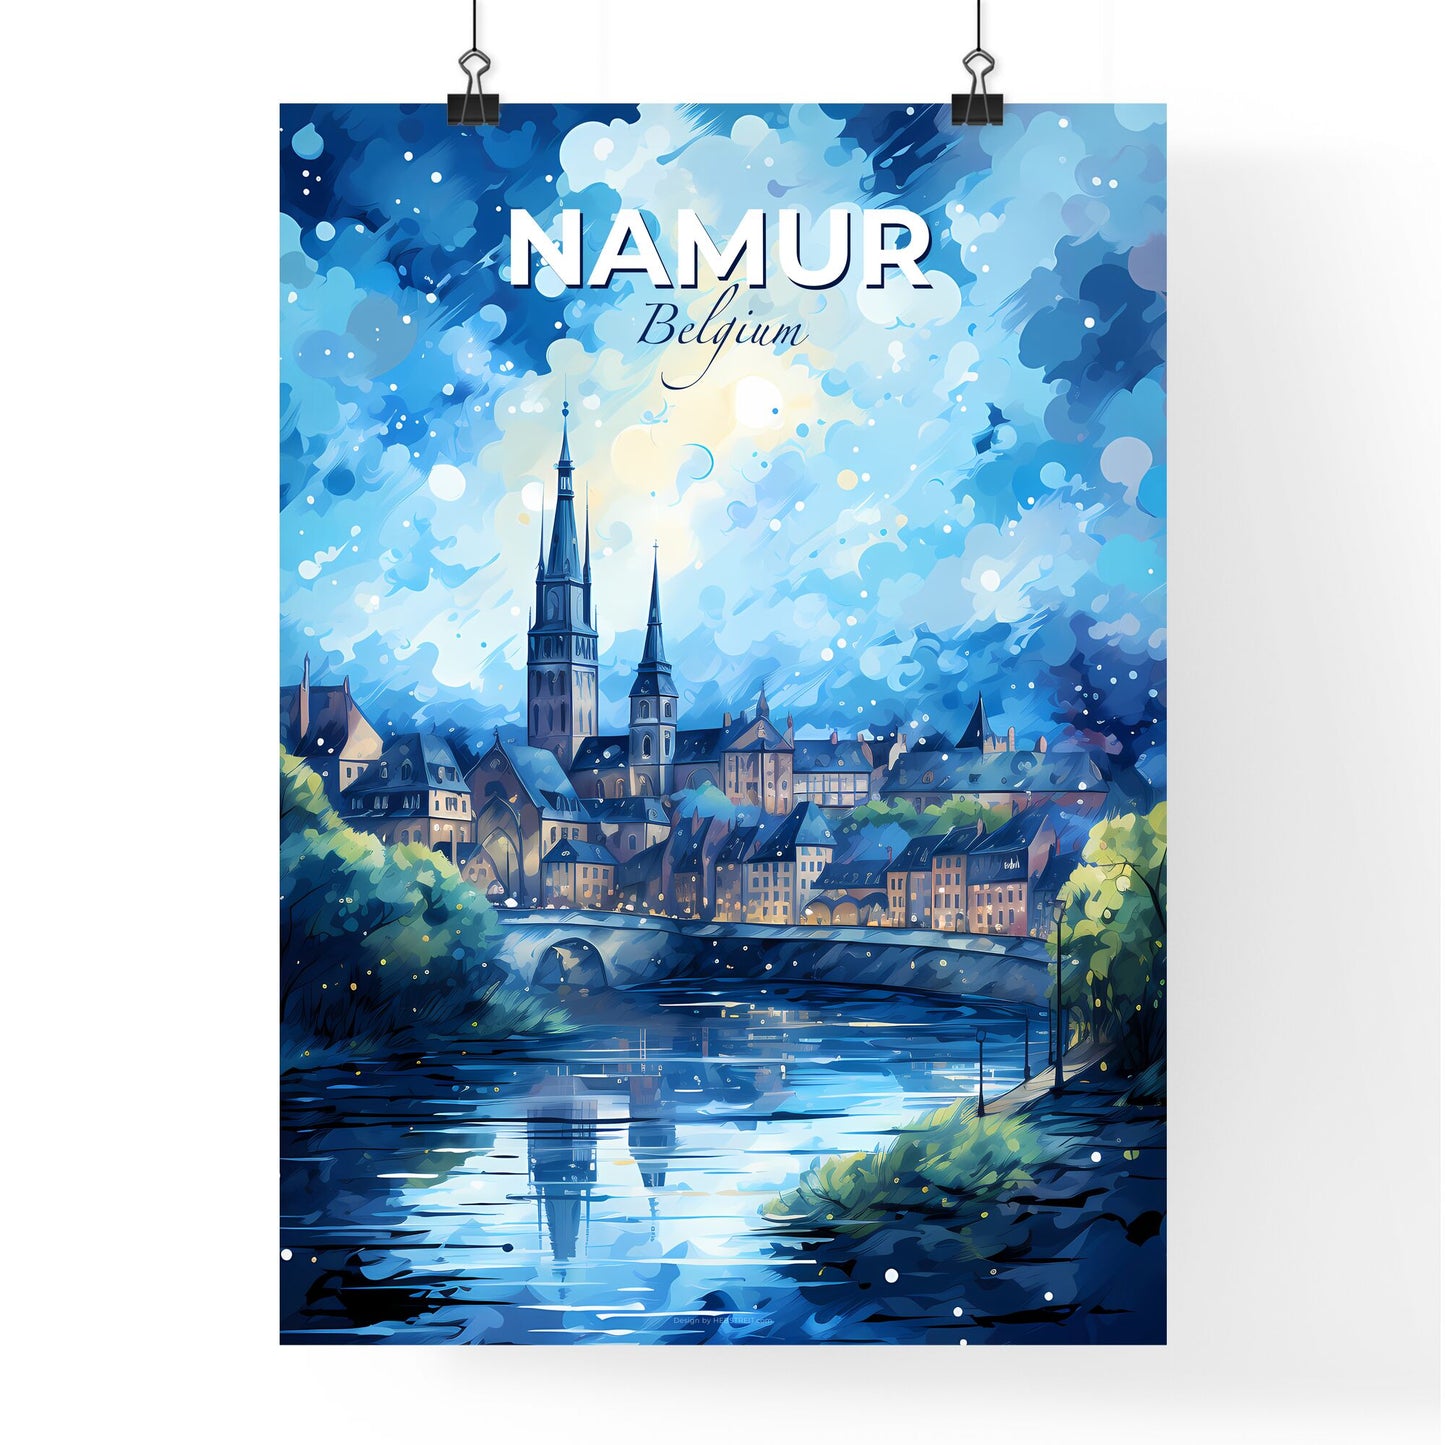 Namur Belgium Skyline - A Painting Of A City With A Bridge And Trees - Customizable Travel Gift Default Title